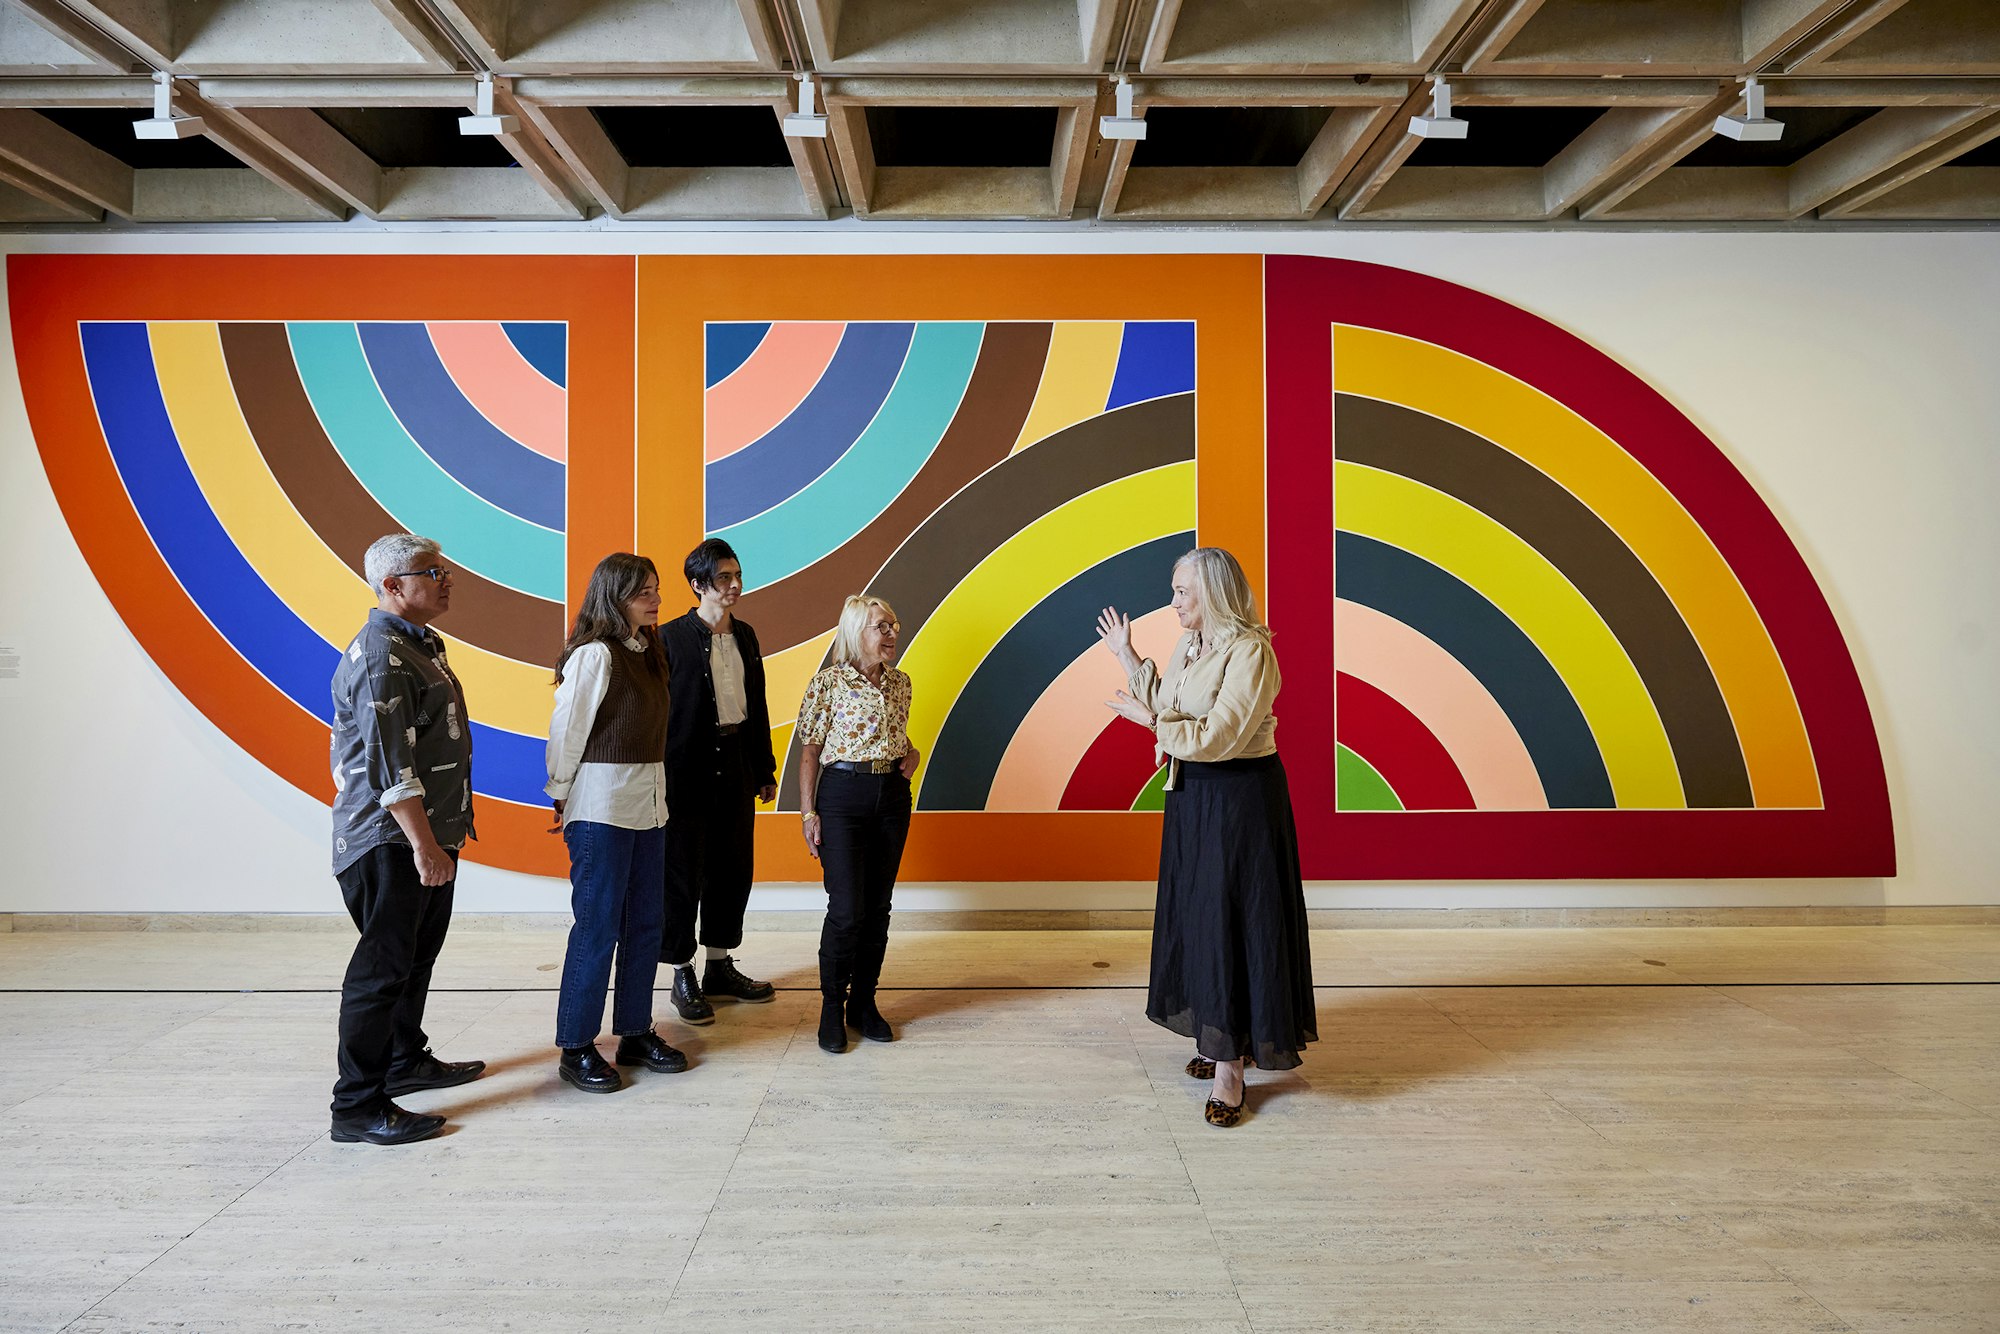 Installation view of the 20th-century galleries at the Art Gallery of New South Wales, featuring Frank Stella Khurasan Gate variation II 1970, Art Gallery of New South Wales, photo: James Horan